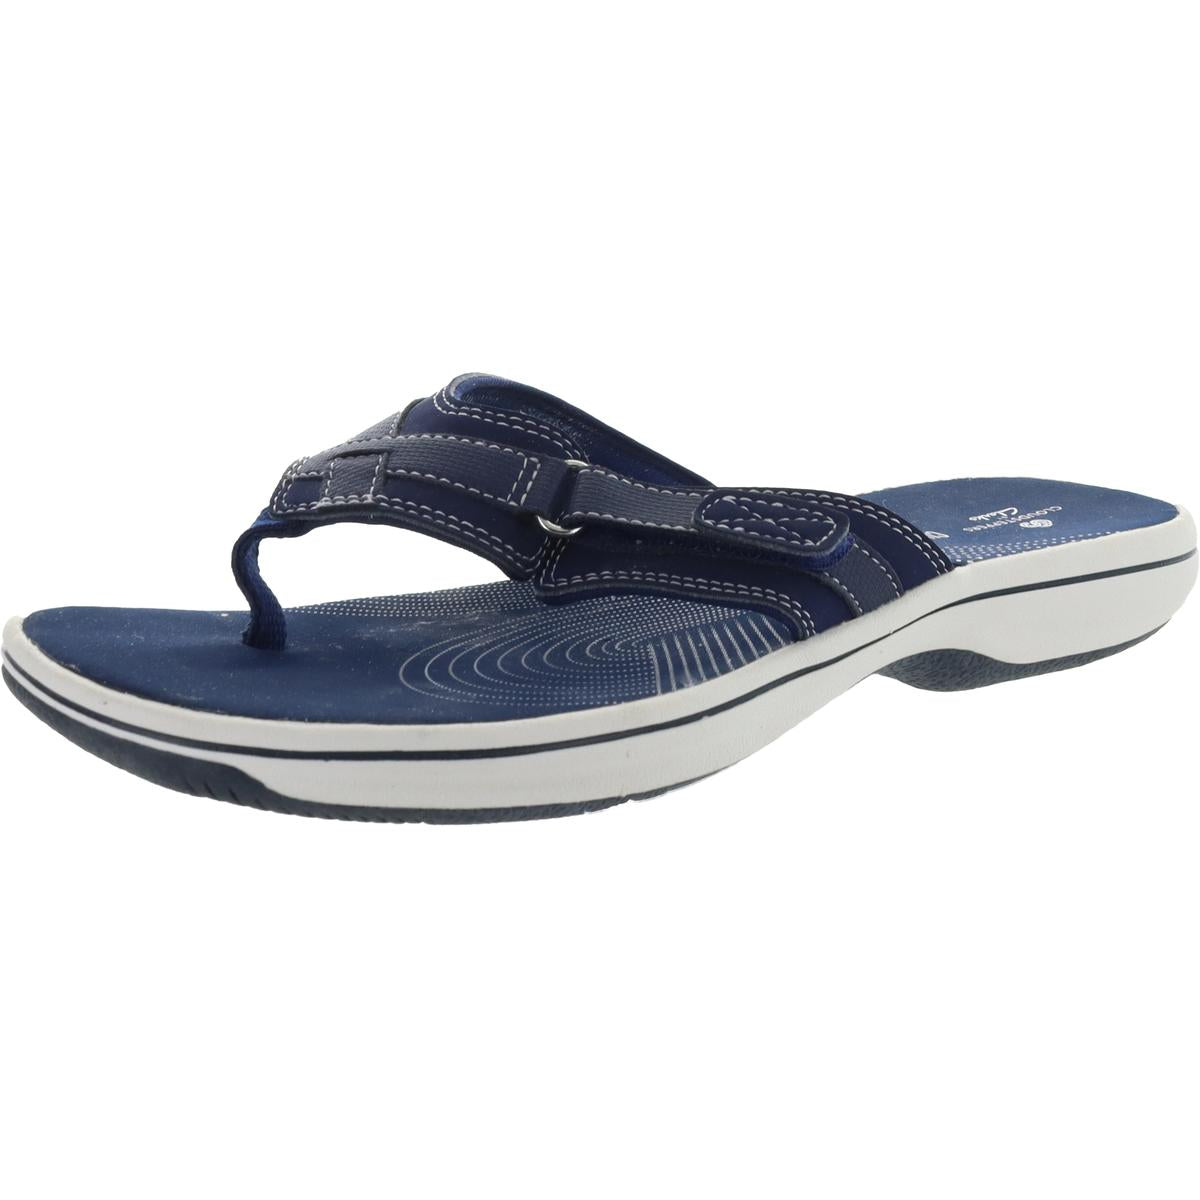 Cloudsteppers by Clarks Breeze Sea Women's Lightweight Adjustable Thon